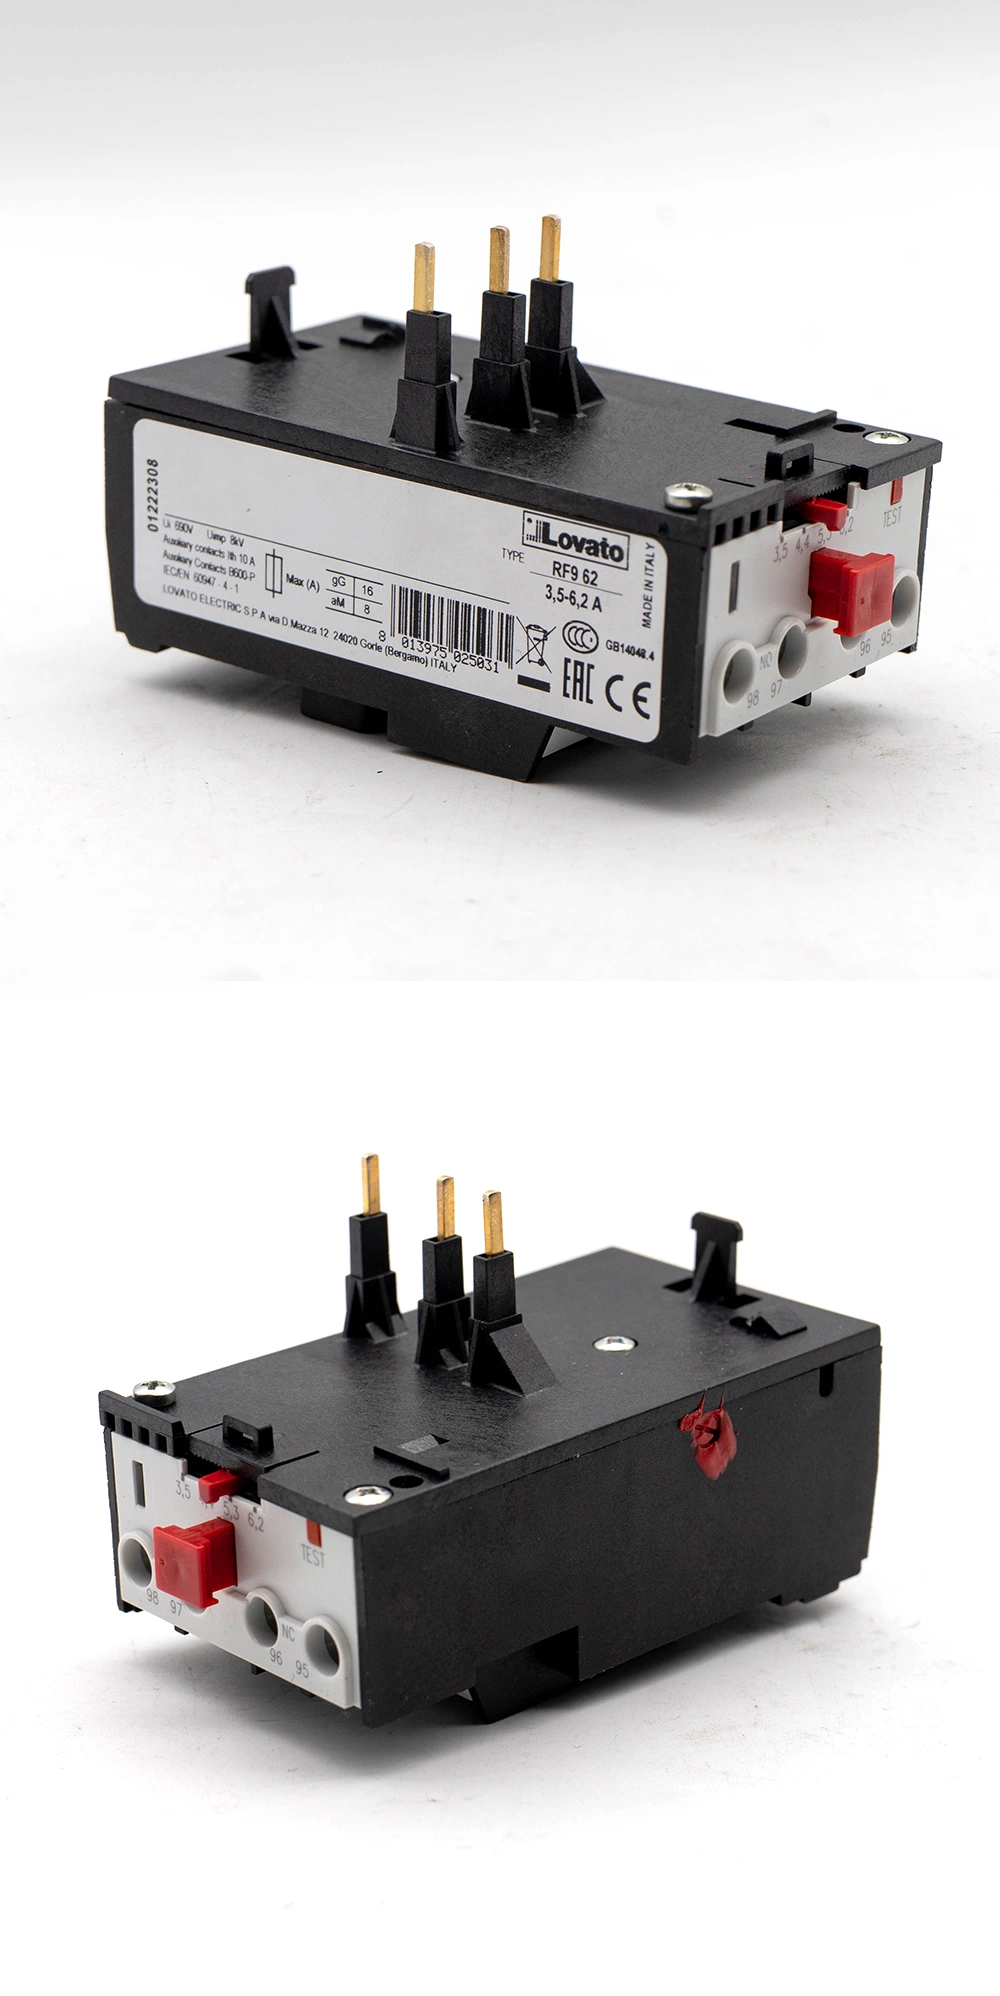 Chinese Factory Supplies Italian Lovat Overload Protection Relay RF9.75 Burner Accessories Boiler Contactor